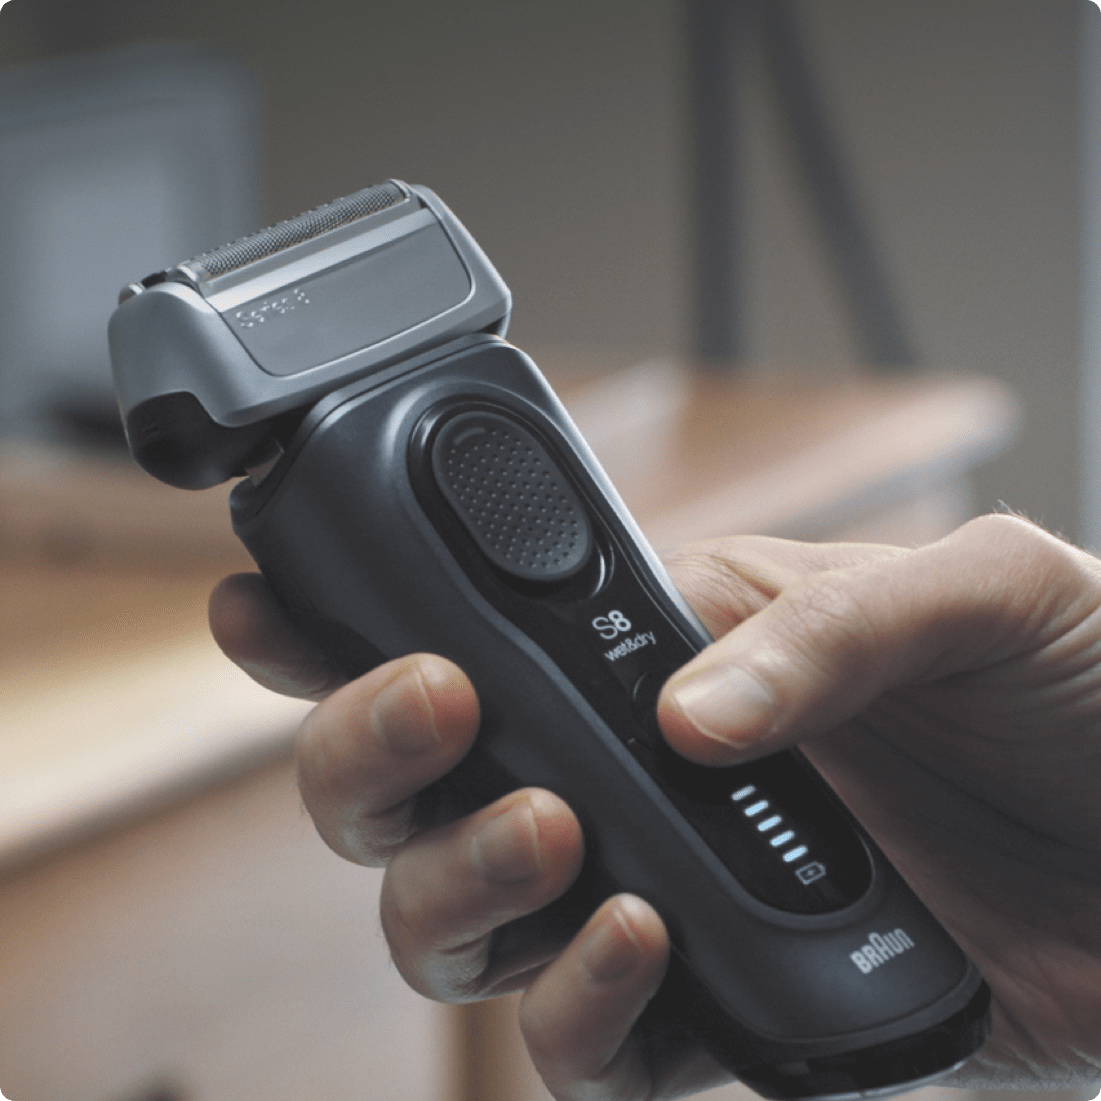 Braun Series 8 Electric Shaver with Adaptive Head